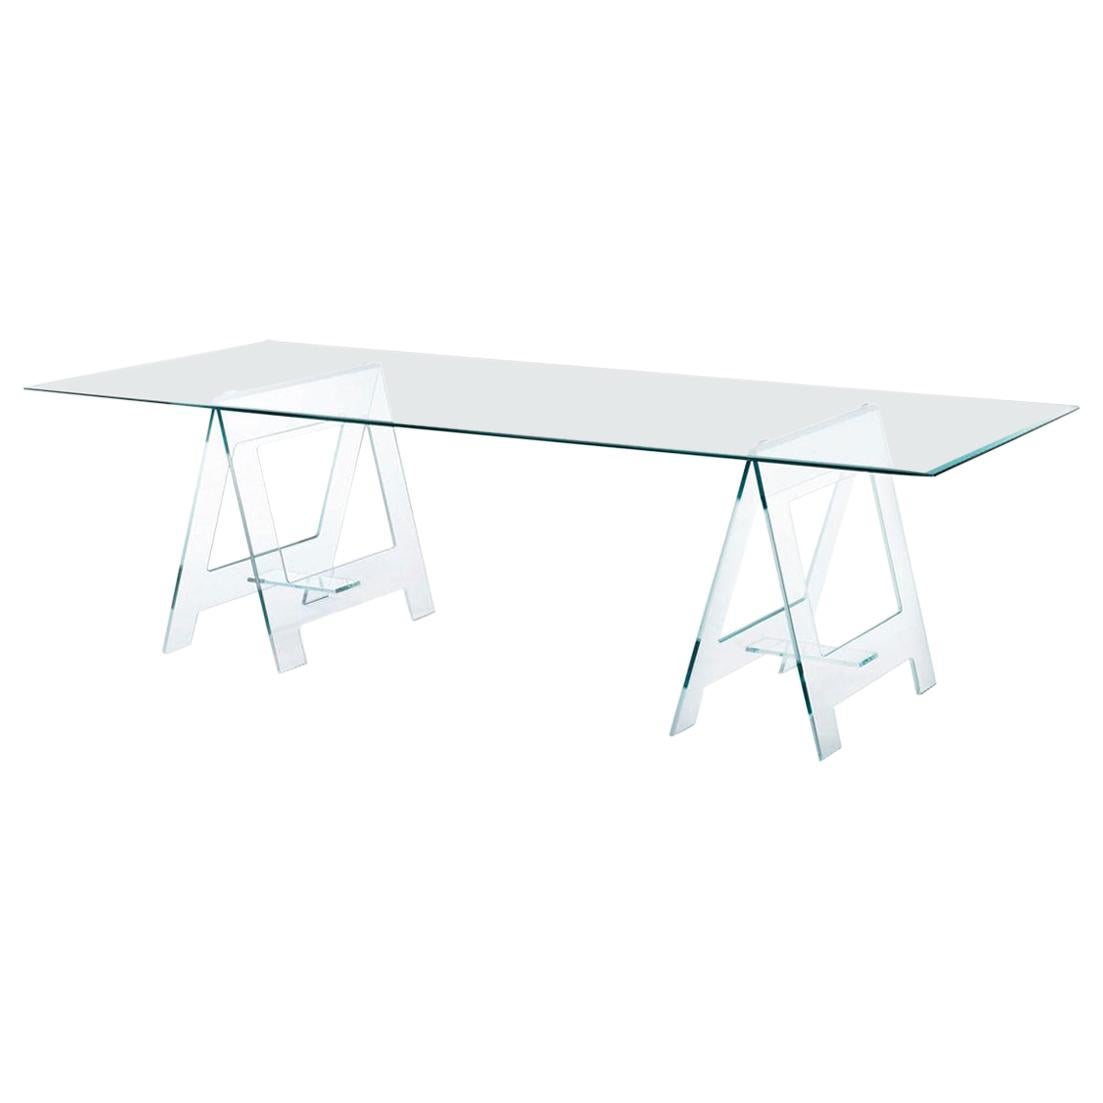 This is a very eclectic table cause it's unusual form with its top on a pair of easels made in clear crystal; it's an important table or desk but at the same time it’s a very light presence in a room.

The Italian design gives a touch of modernism